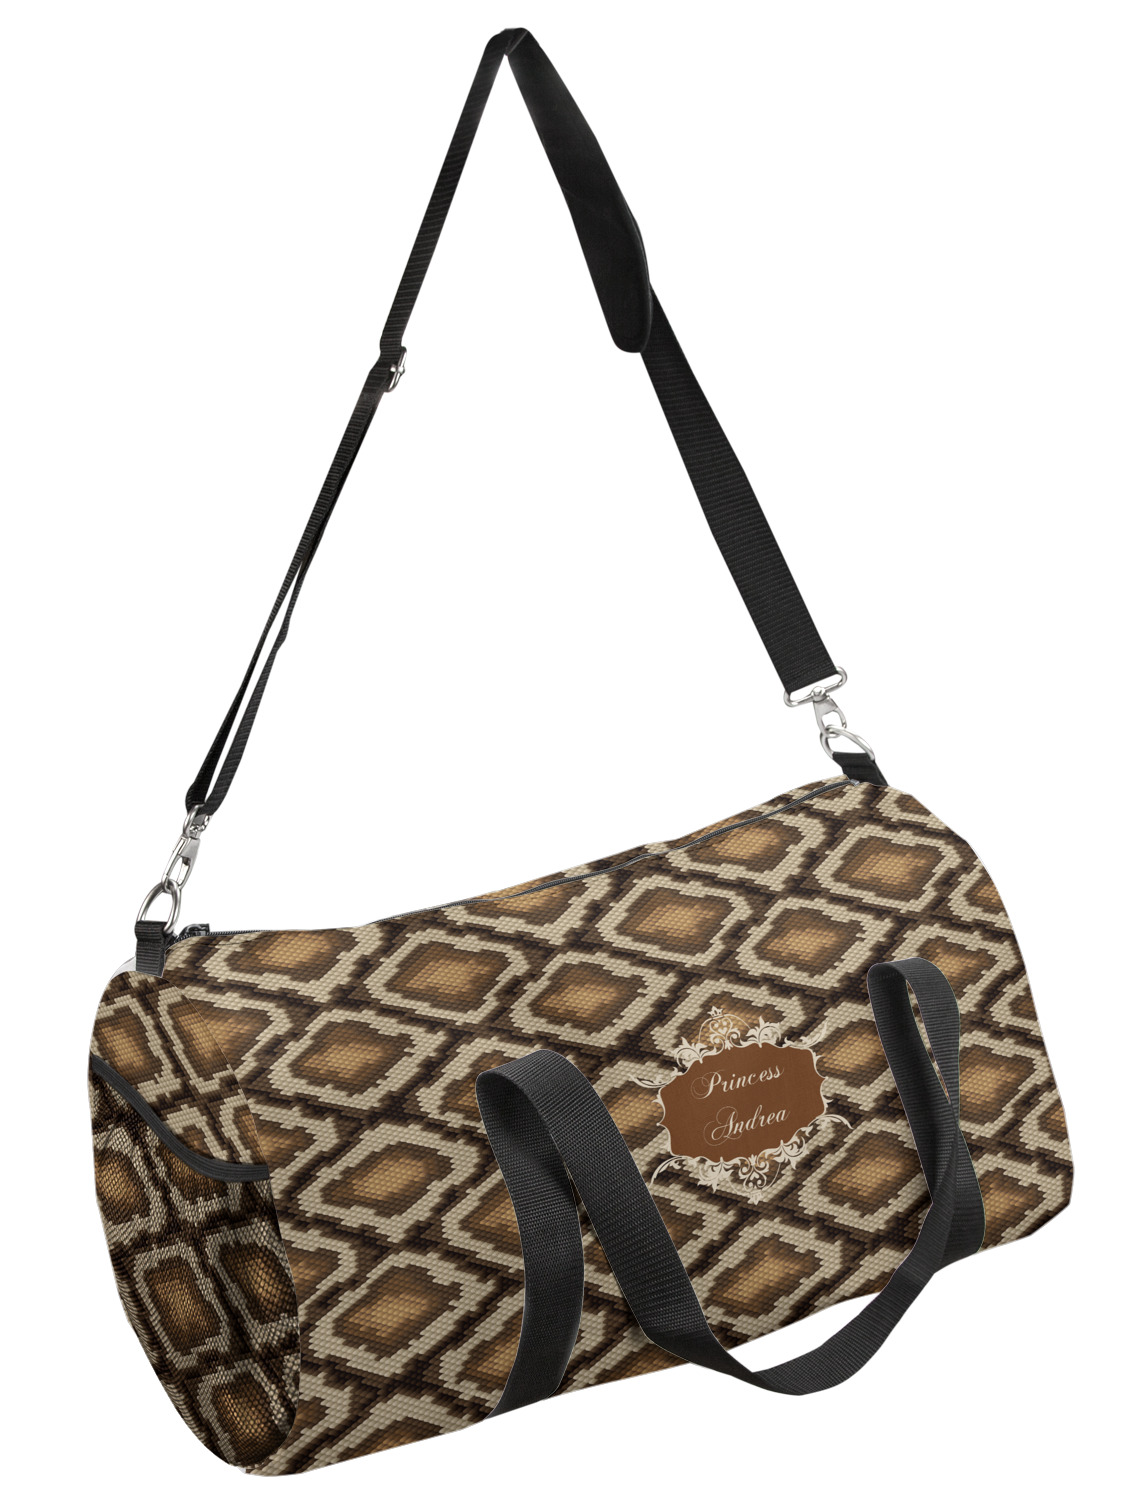 Snake Skin Duffel Bag - Small (Personalized) - YouCustomizeIt